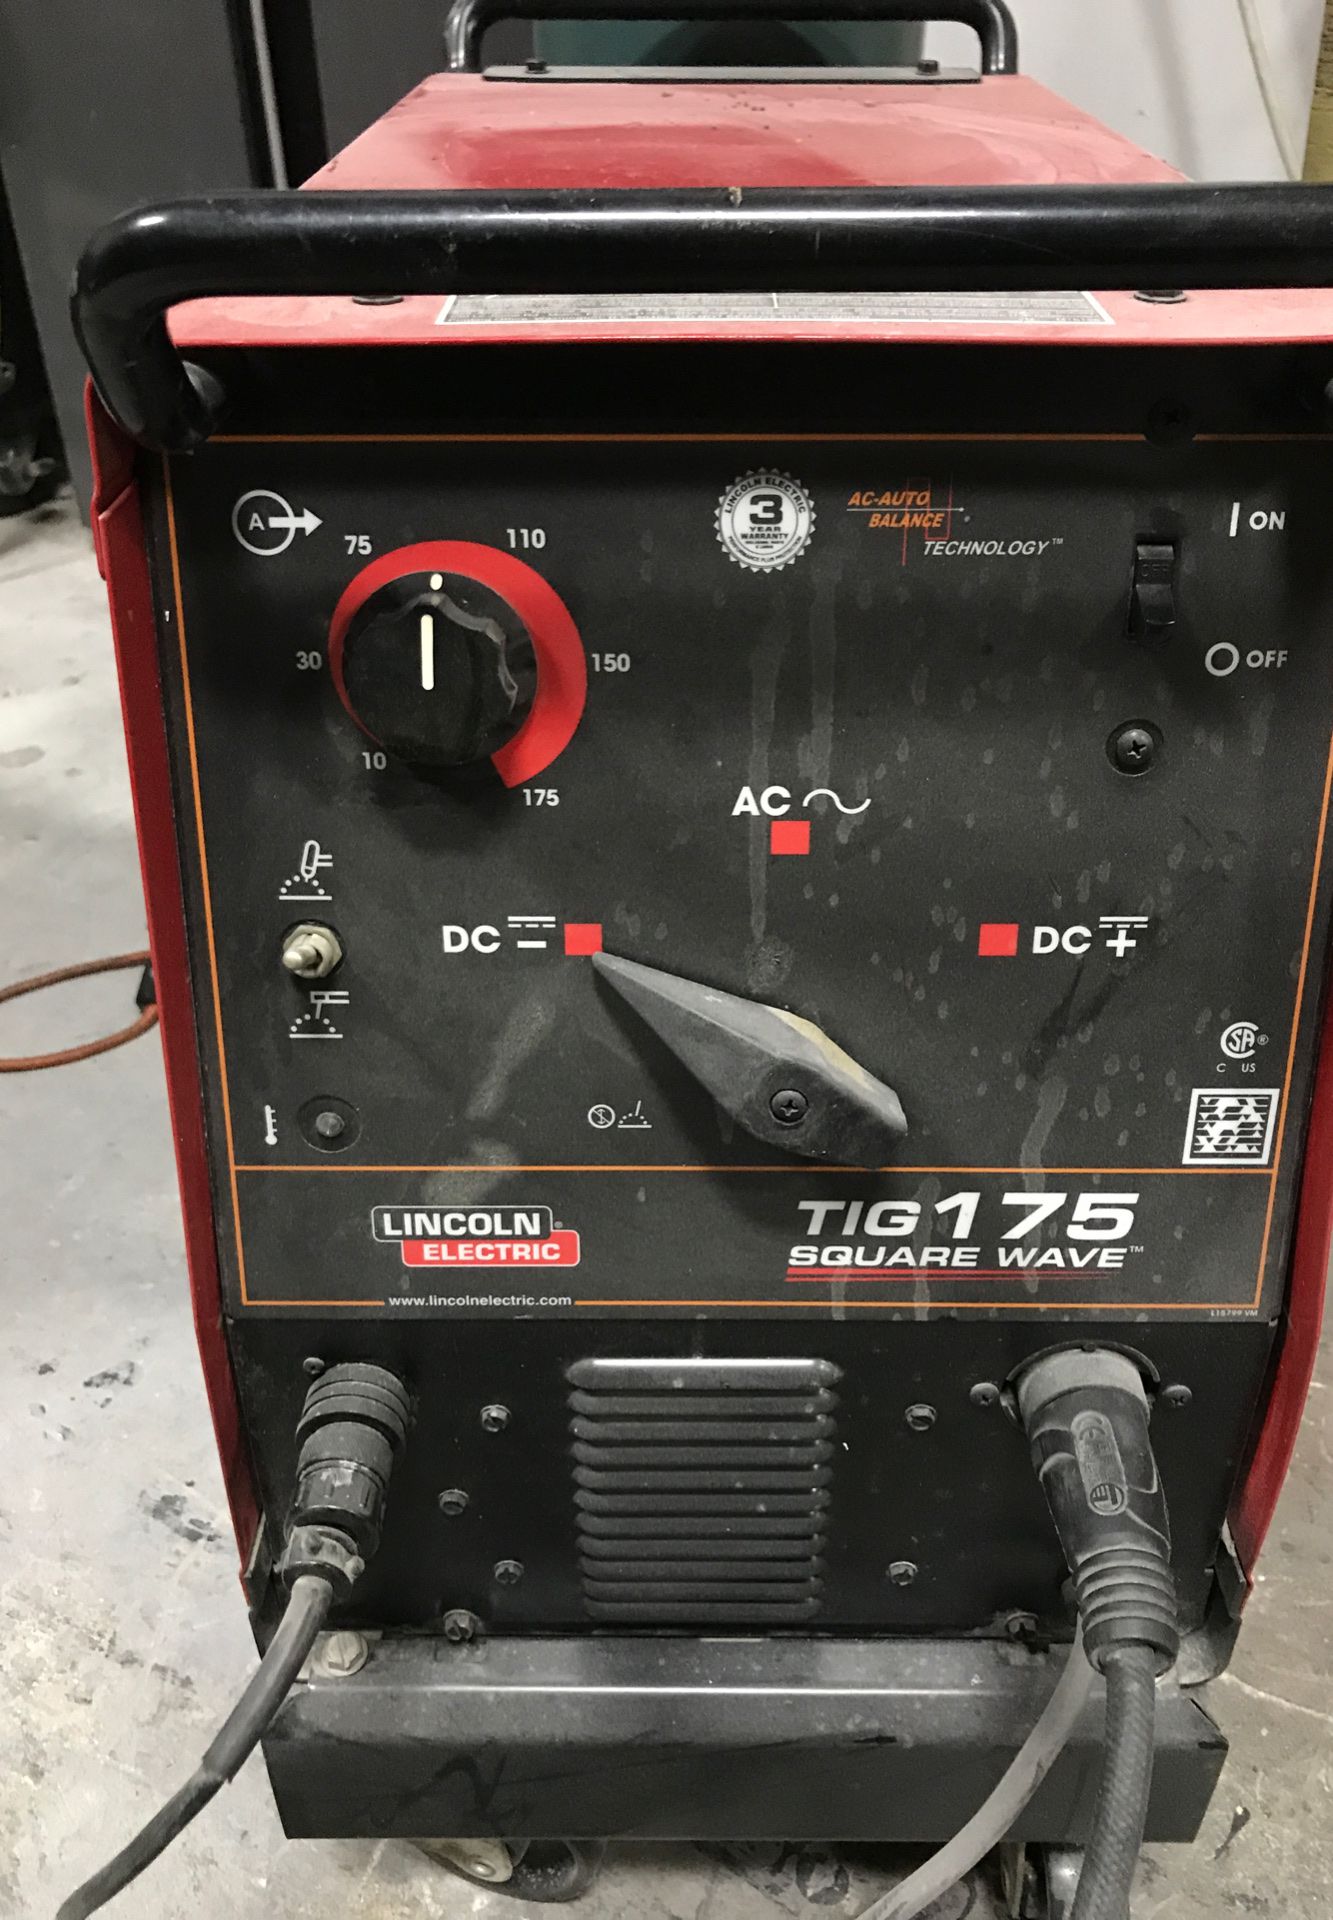 Lincoln electric square wave TIG 175 welder